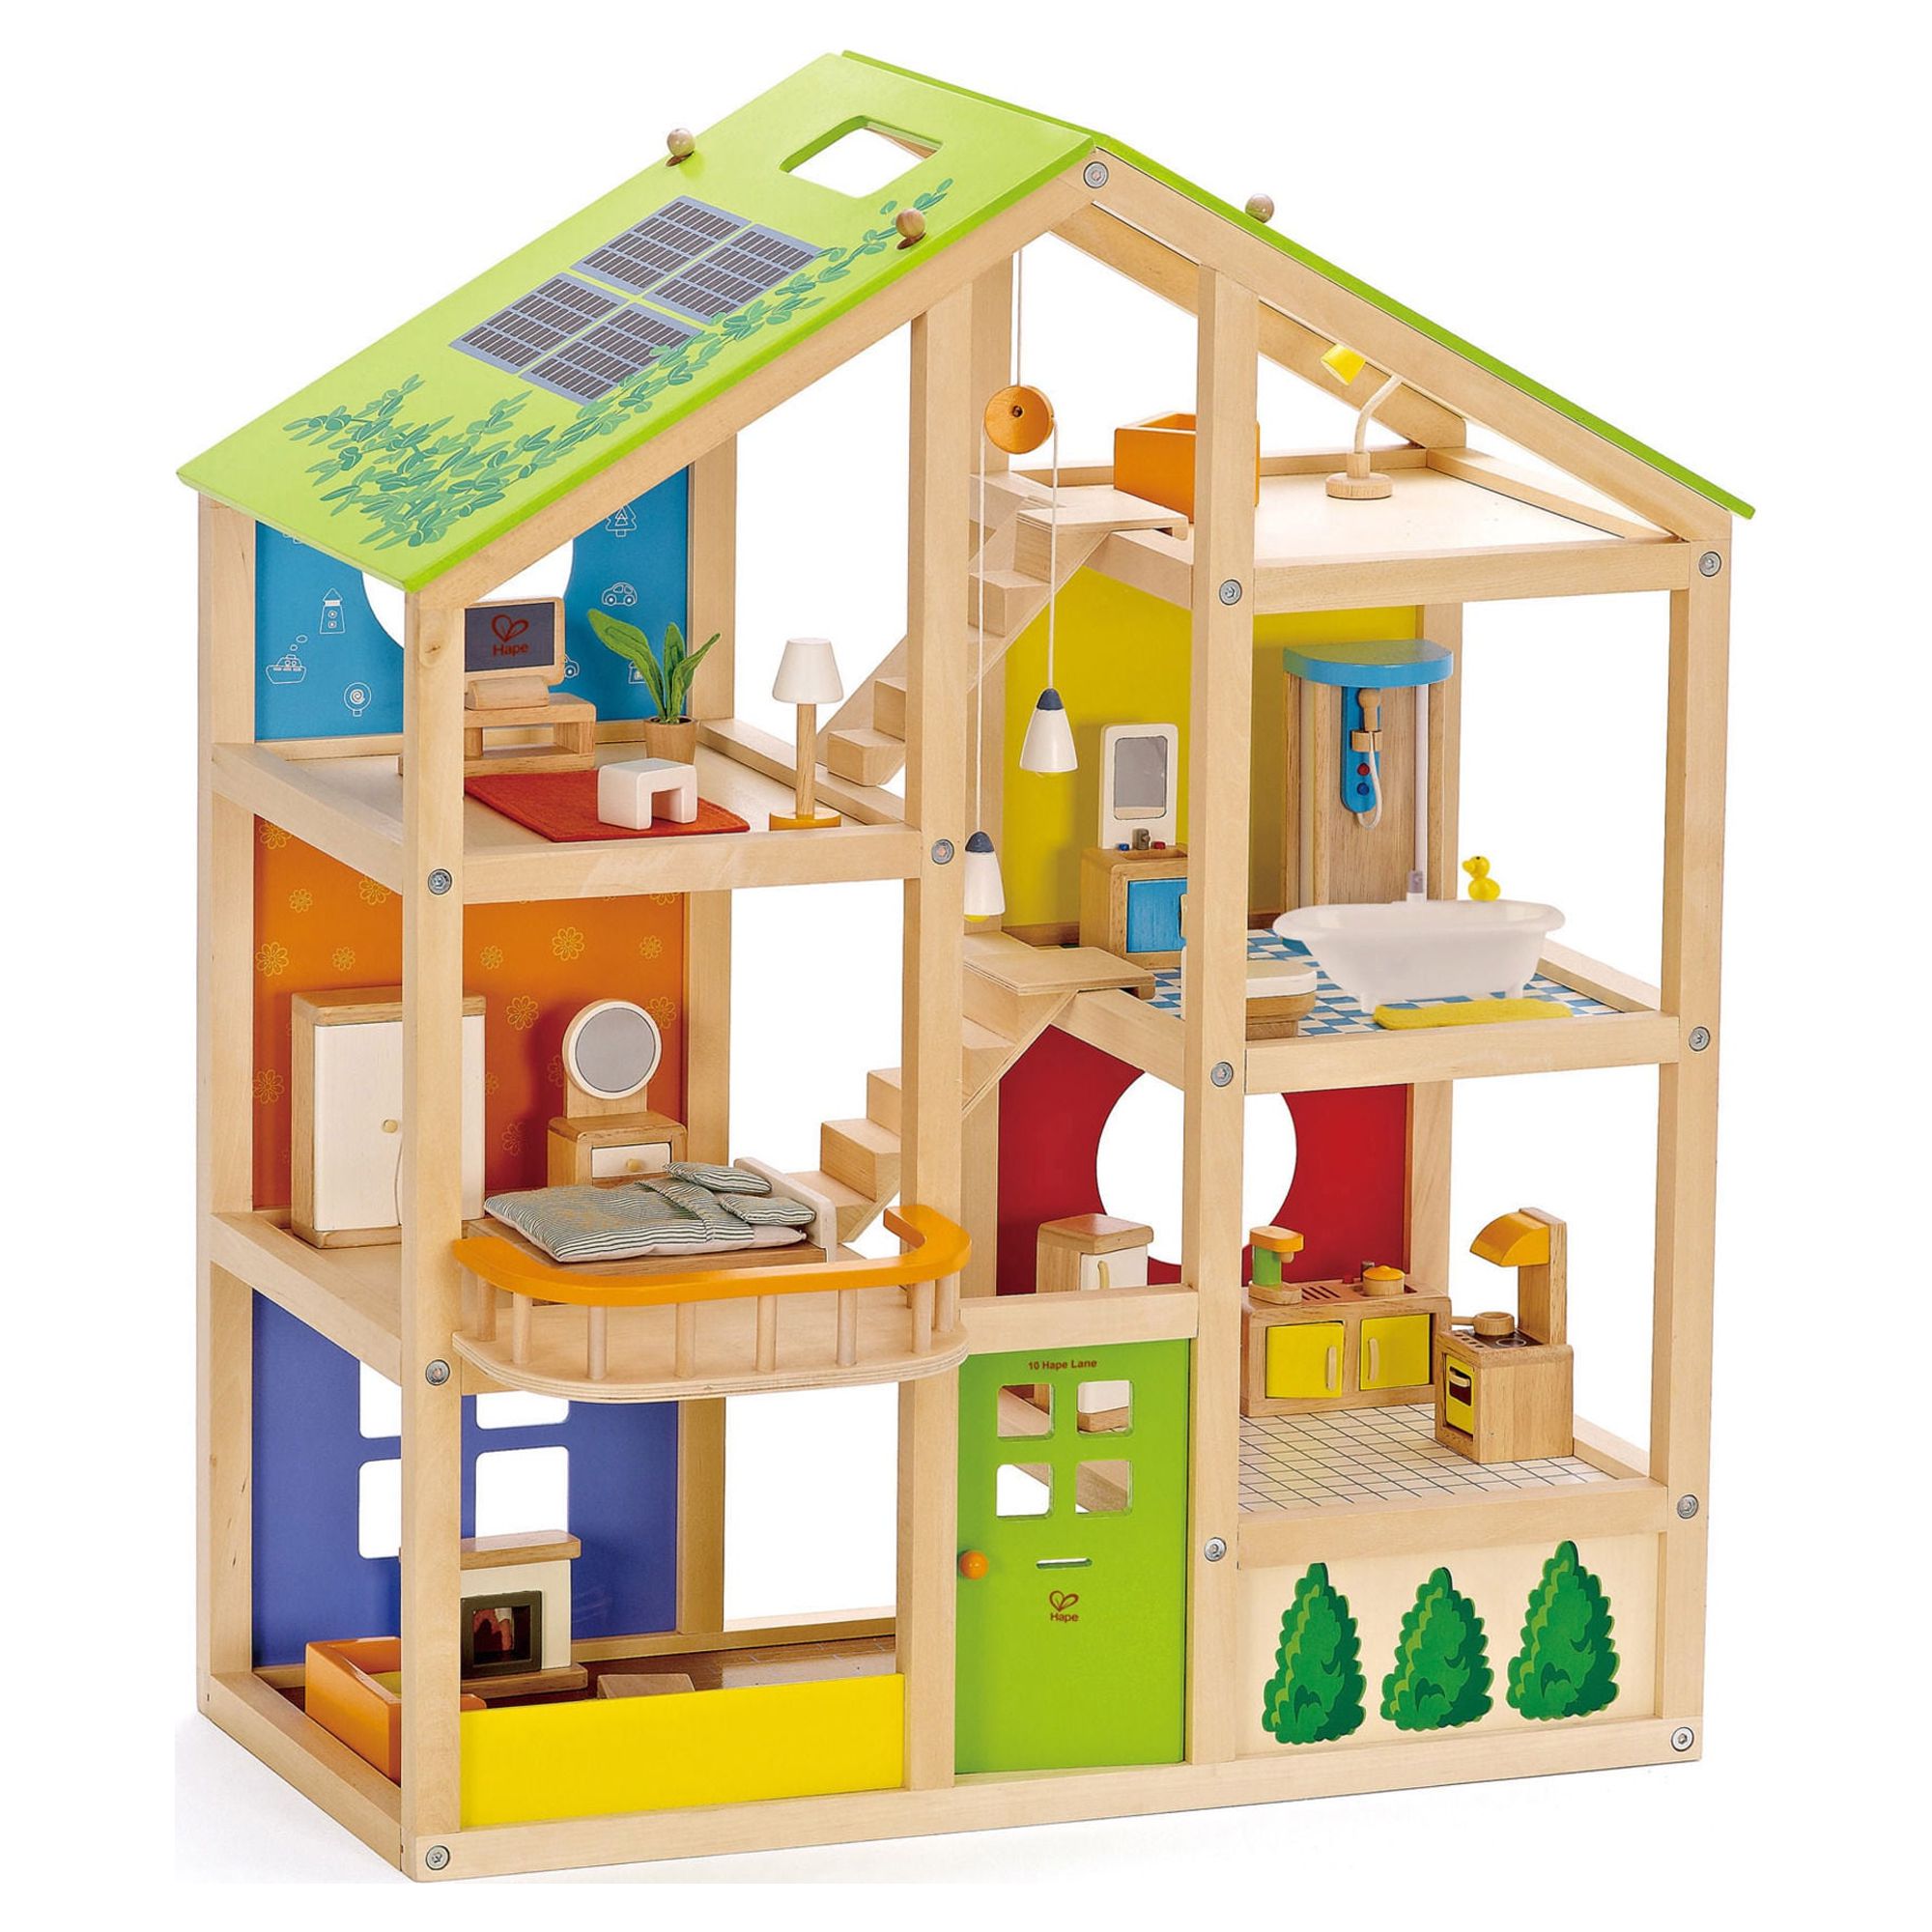 Hape All Seasons Wooden Furnished Dollhouse Playset - image 1 of 6